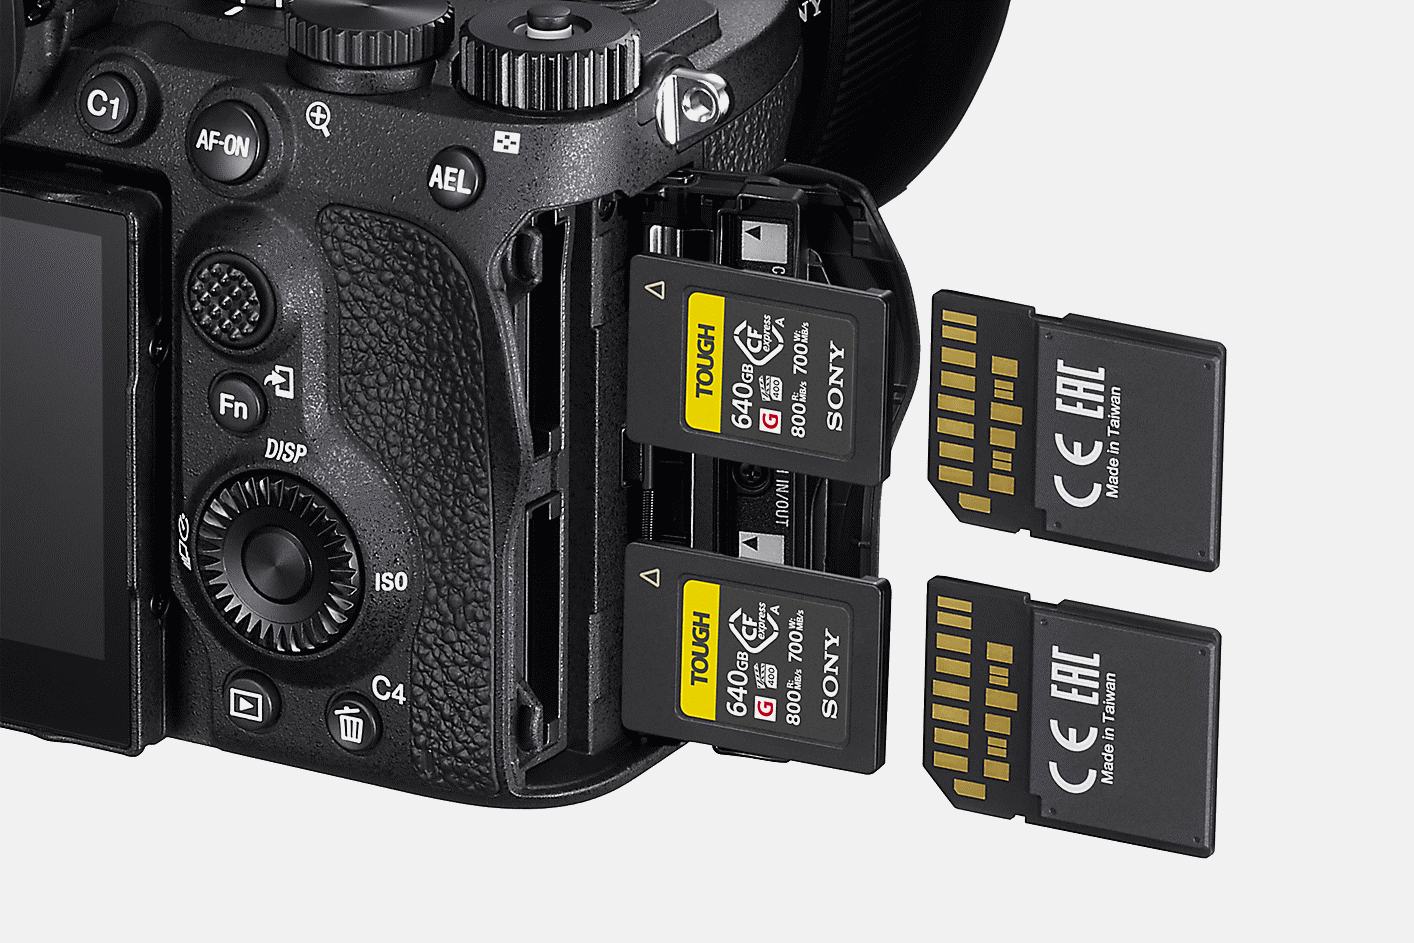 Image of the camera with CFexpress cards and SD cards